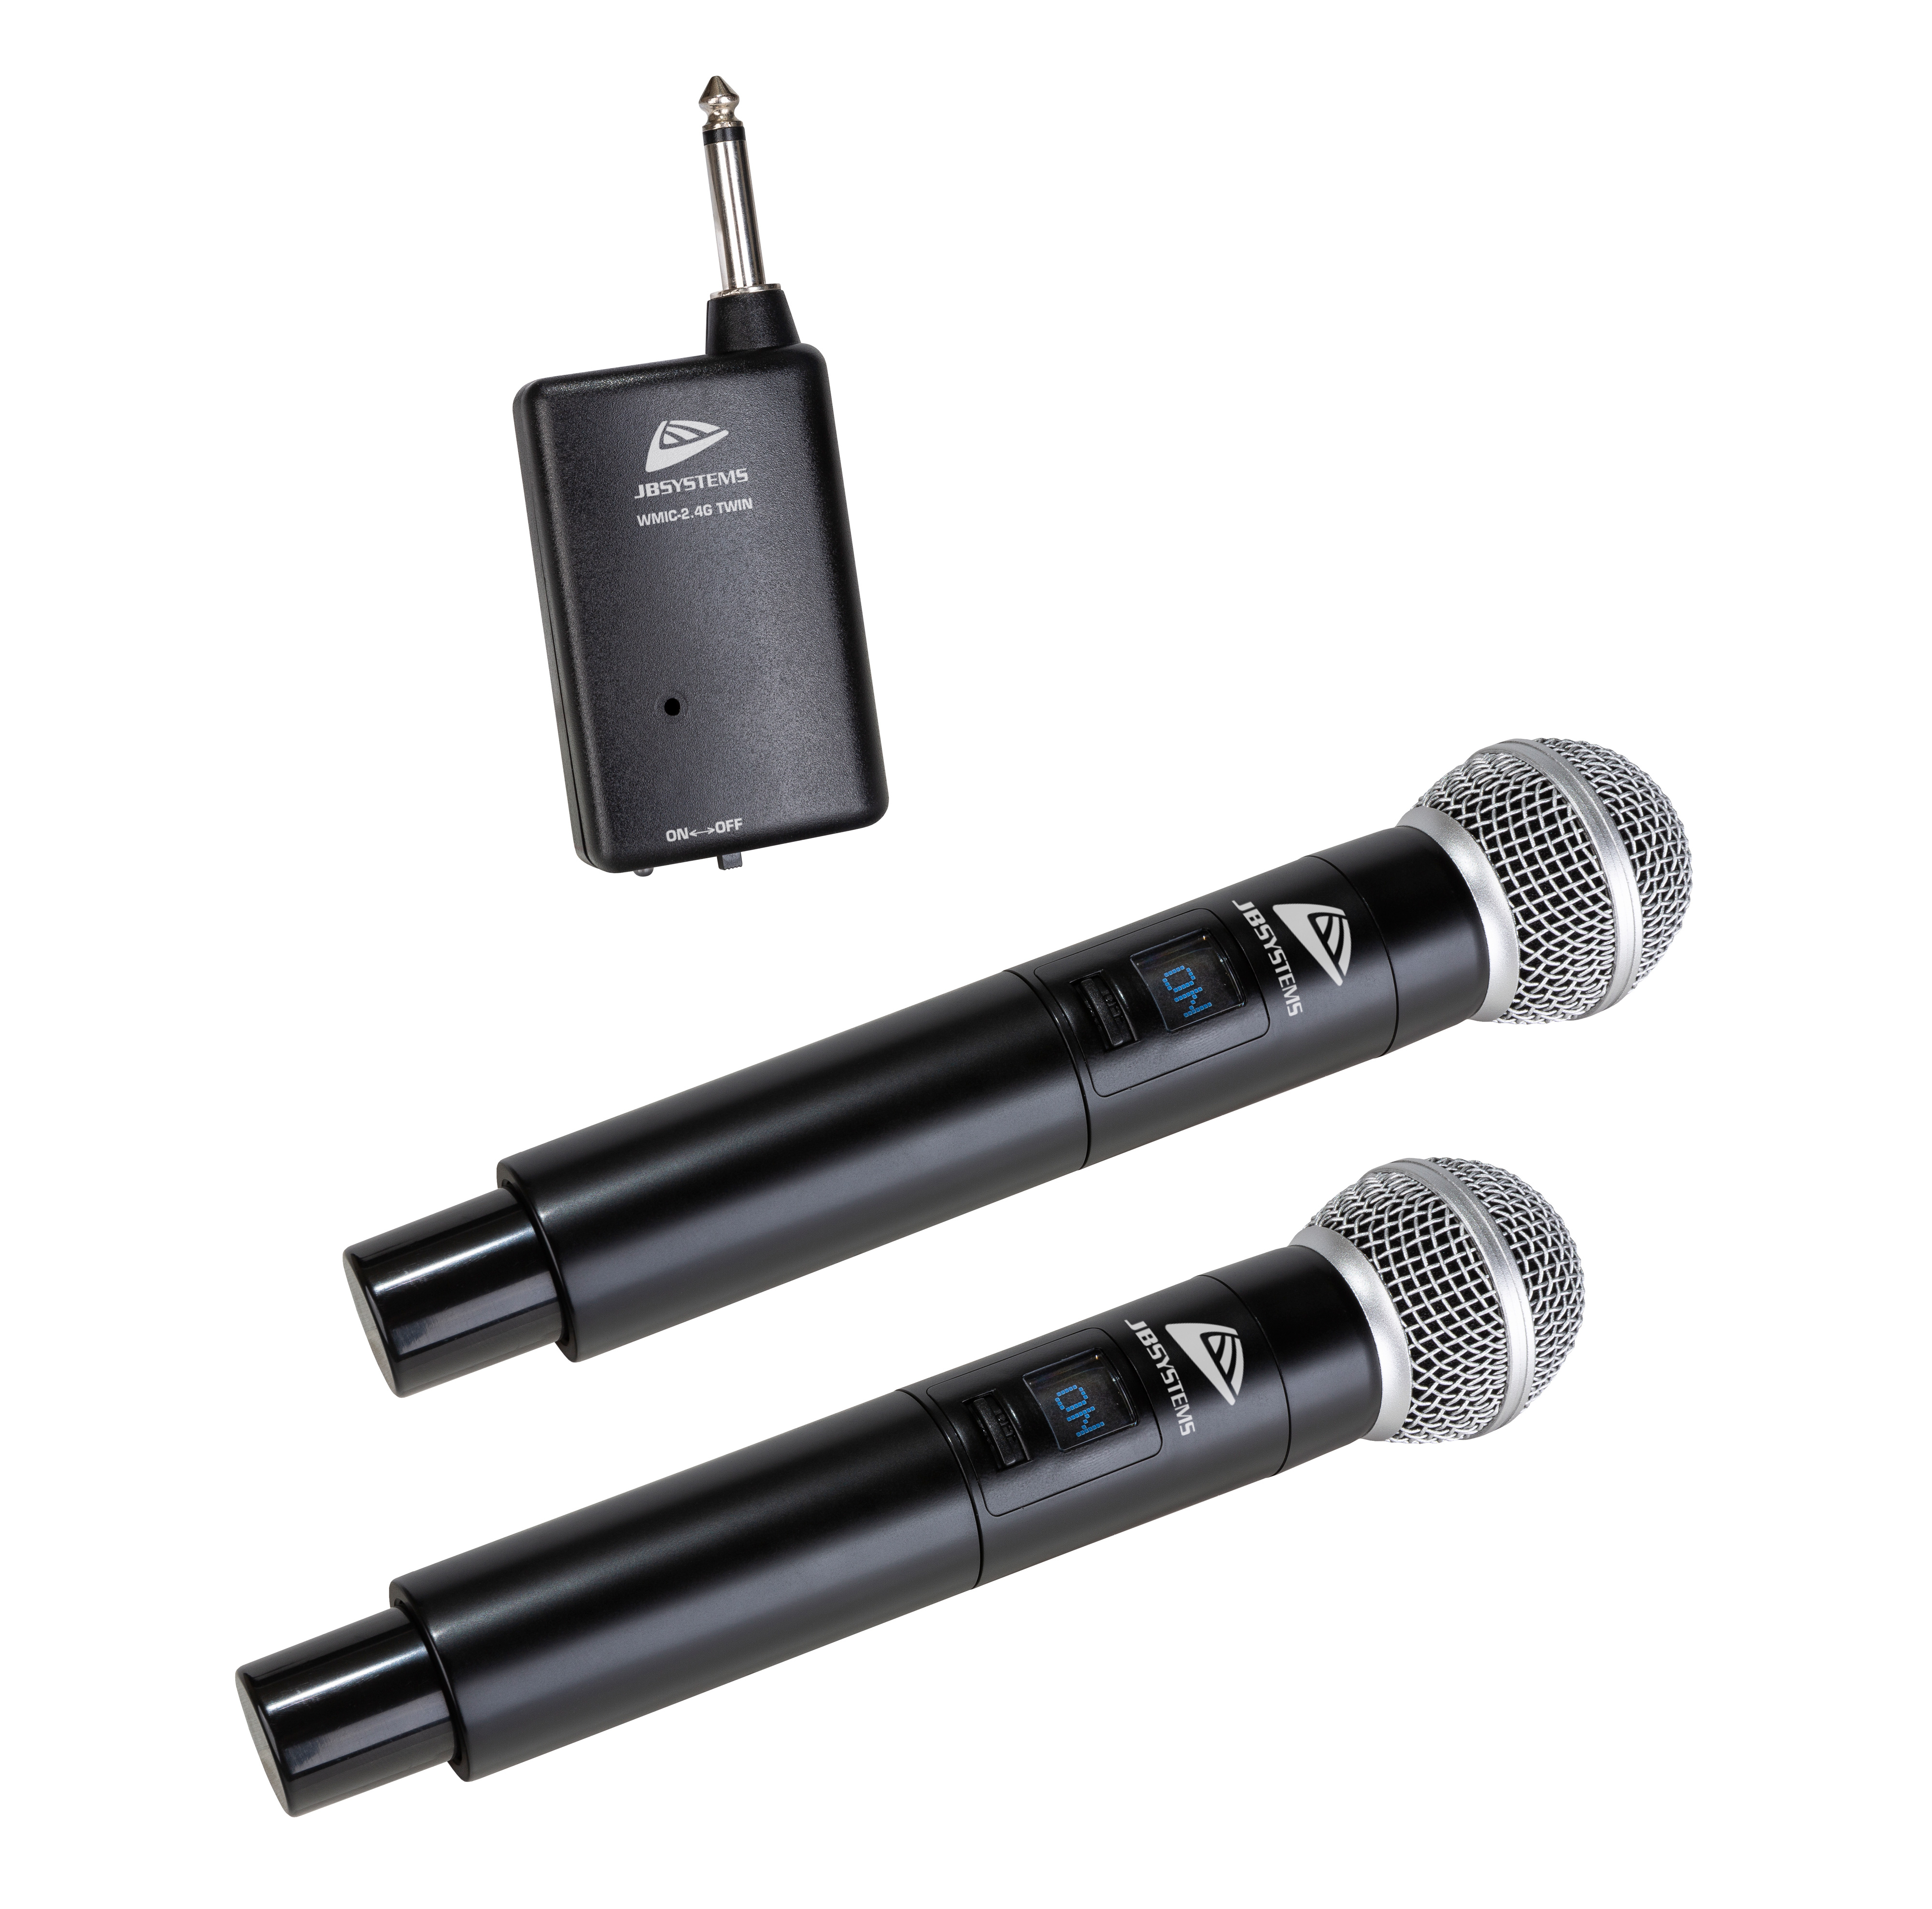 Easy, plug and play, wireless 2.4GHz Dual hand microphone system: 2 microphones and 1 receiver